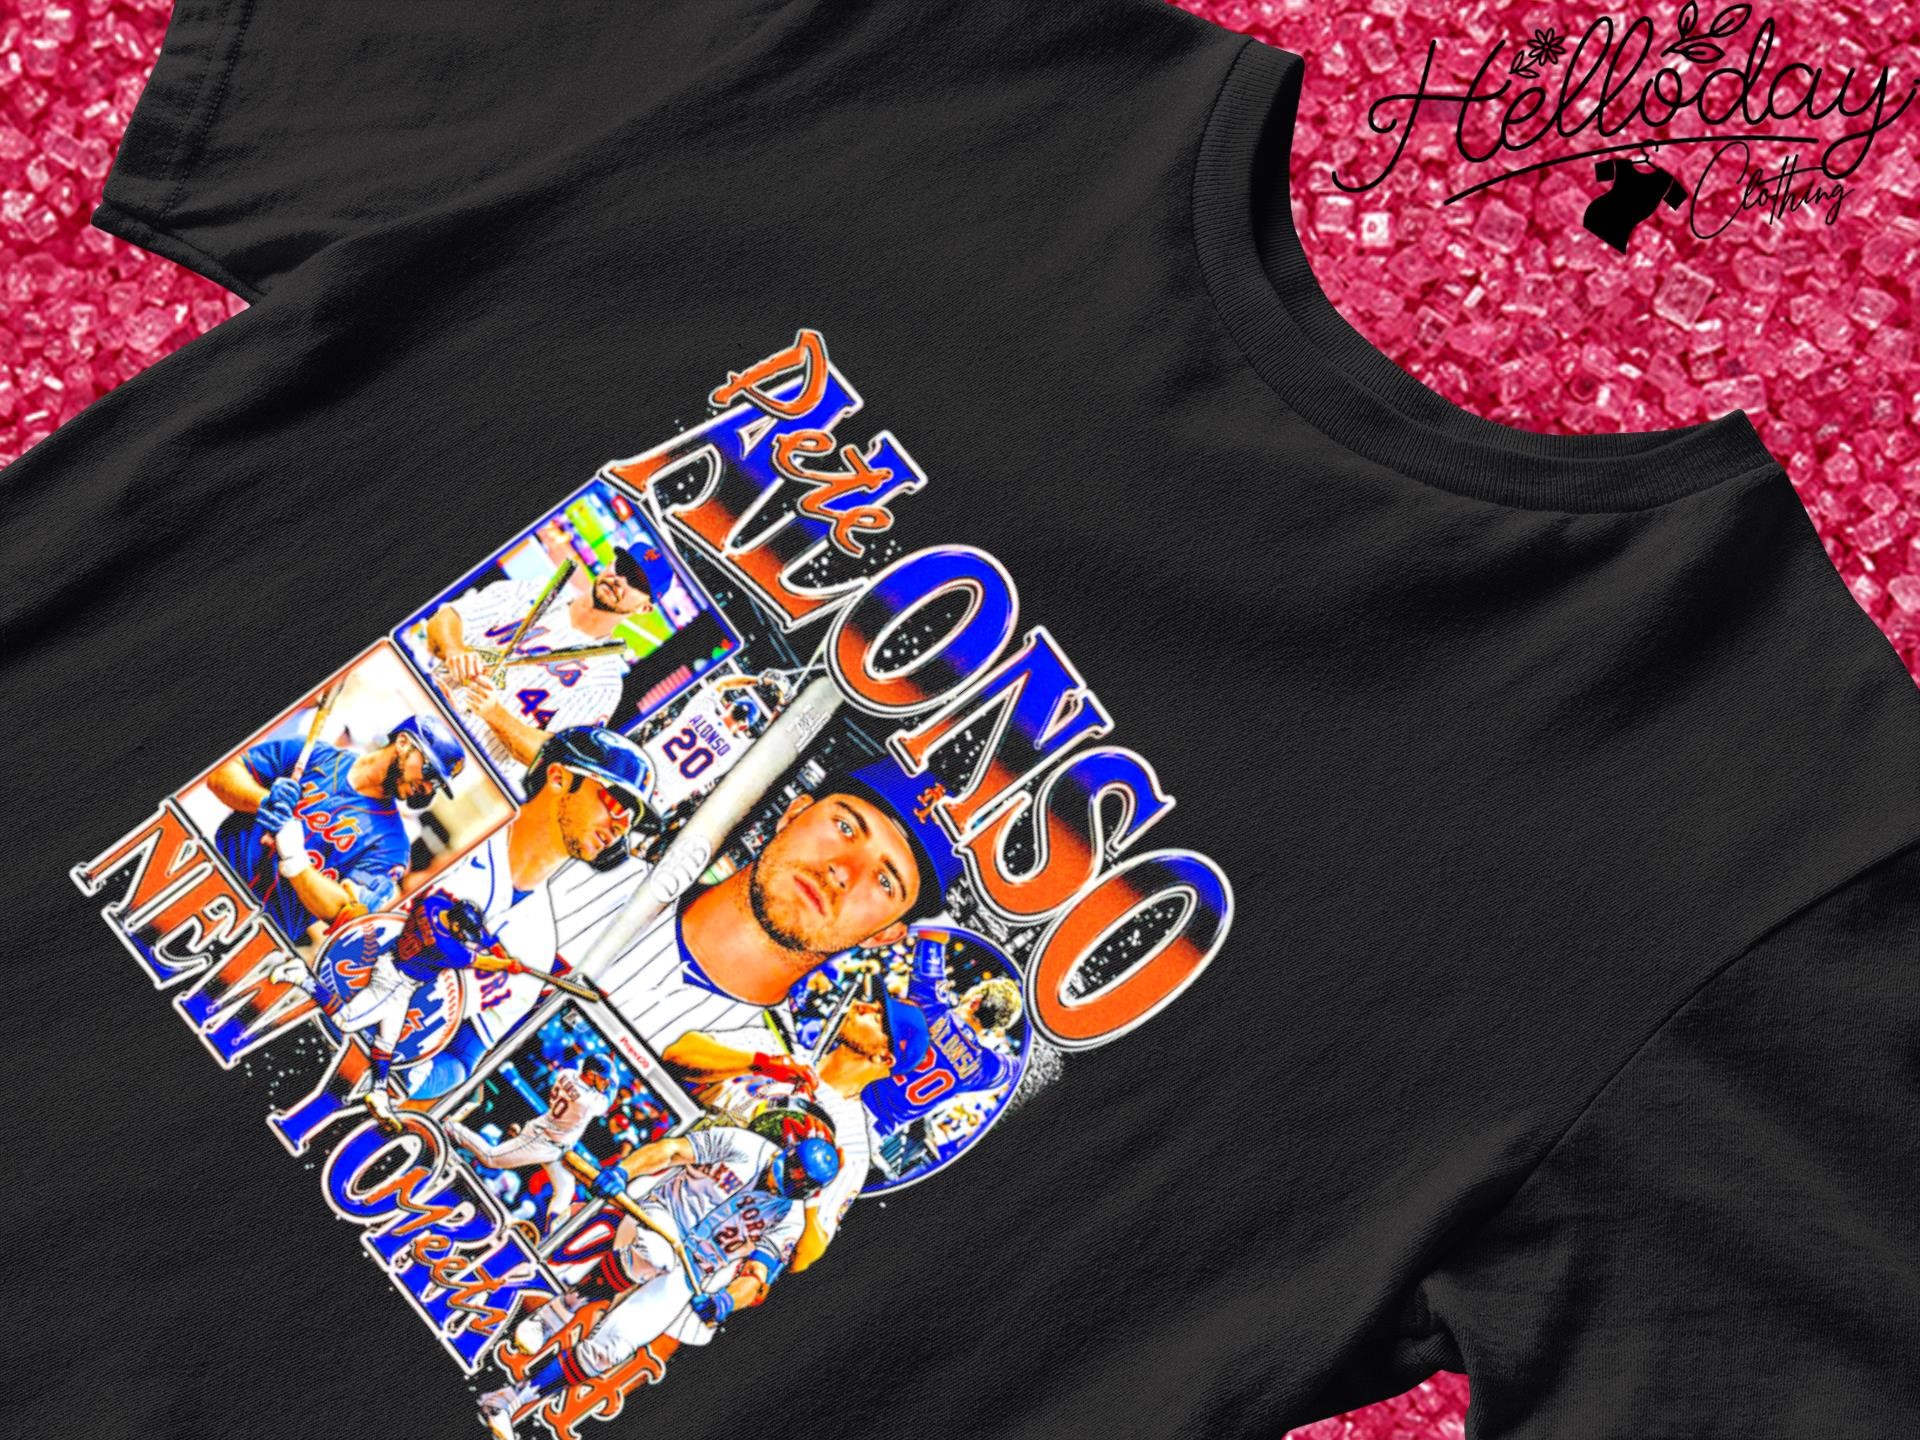 Pete Alonso New York Mets T-shirt